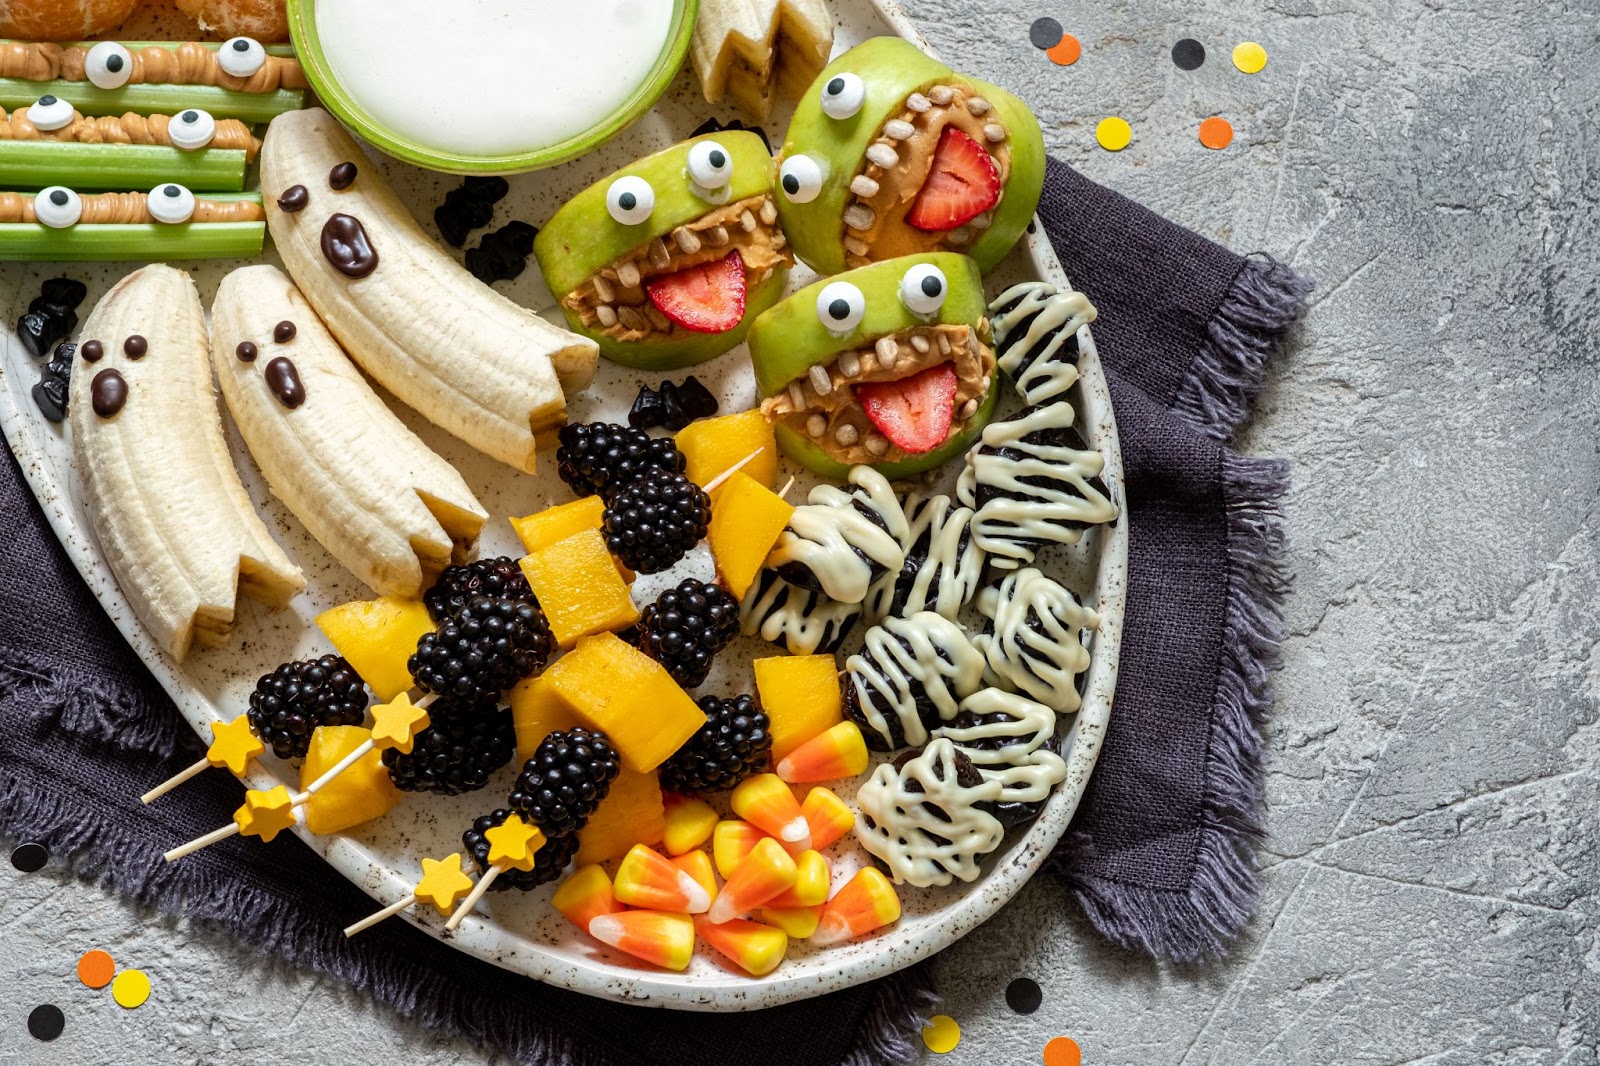 Halloween themed plate of fruits and veggies